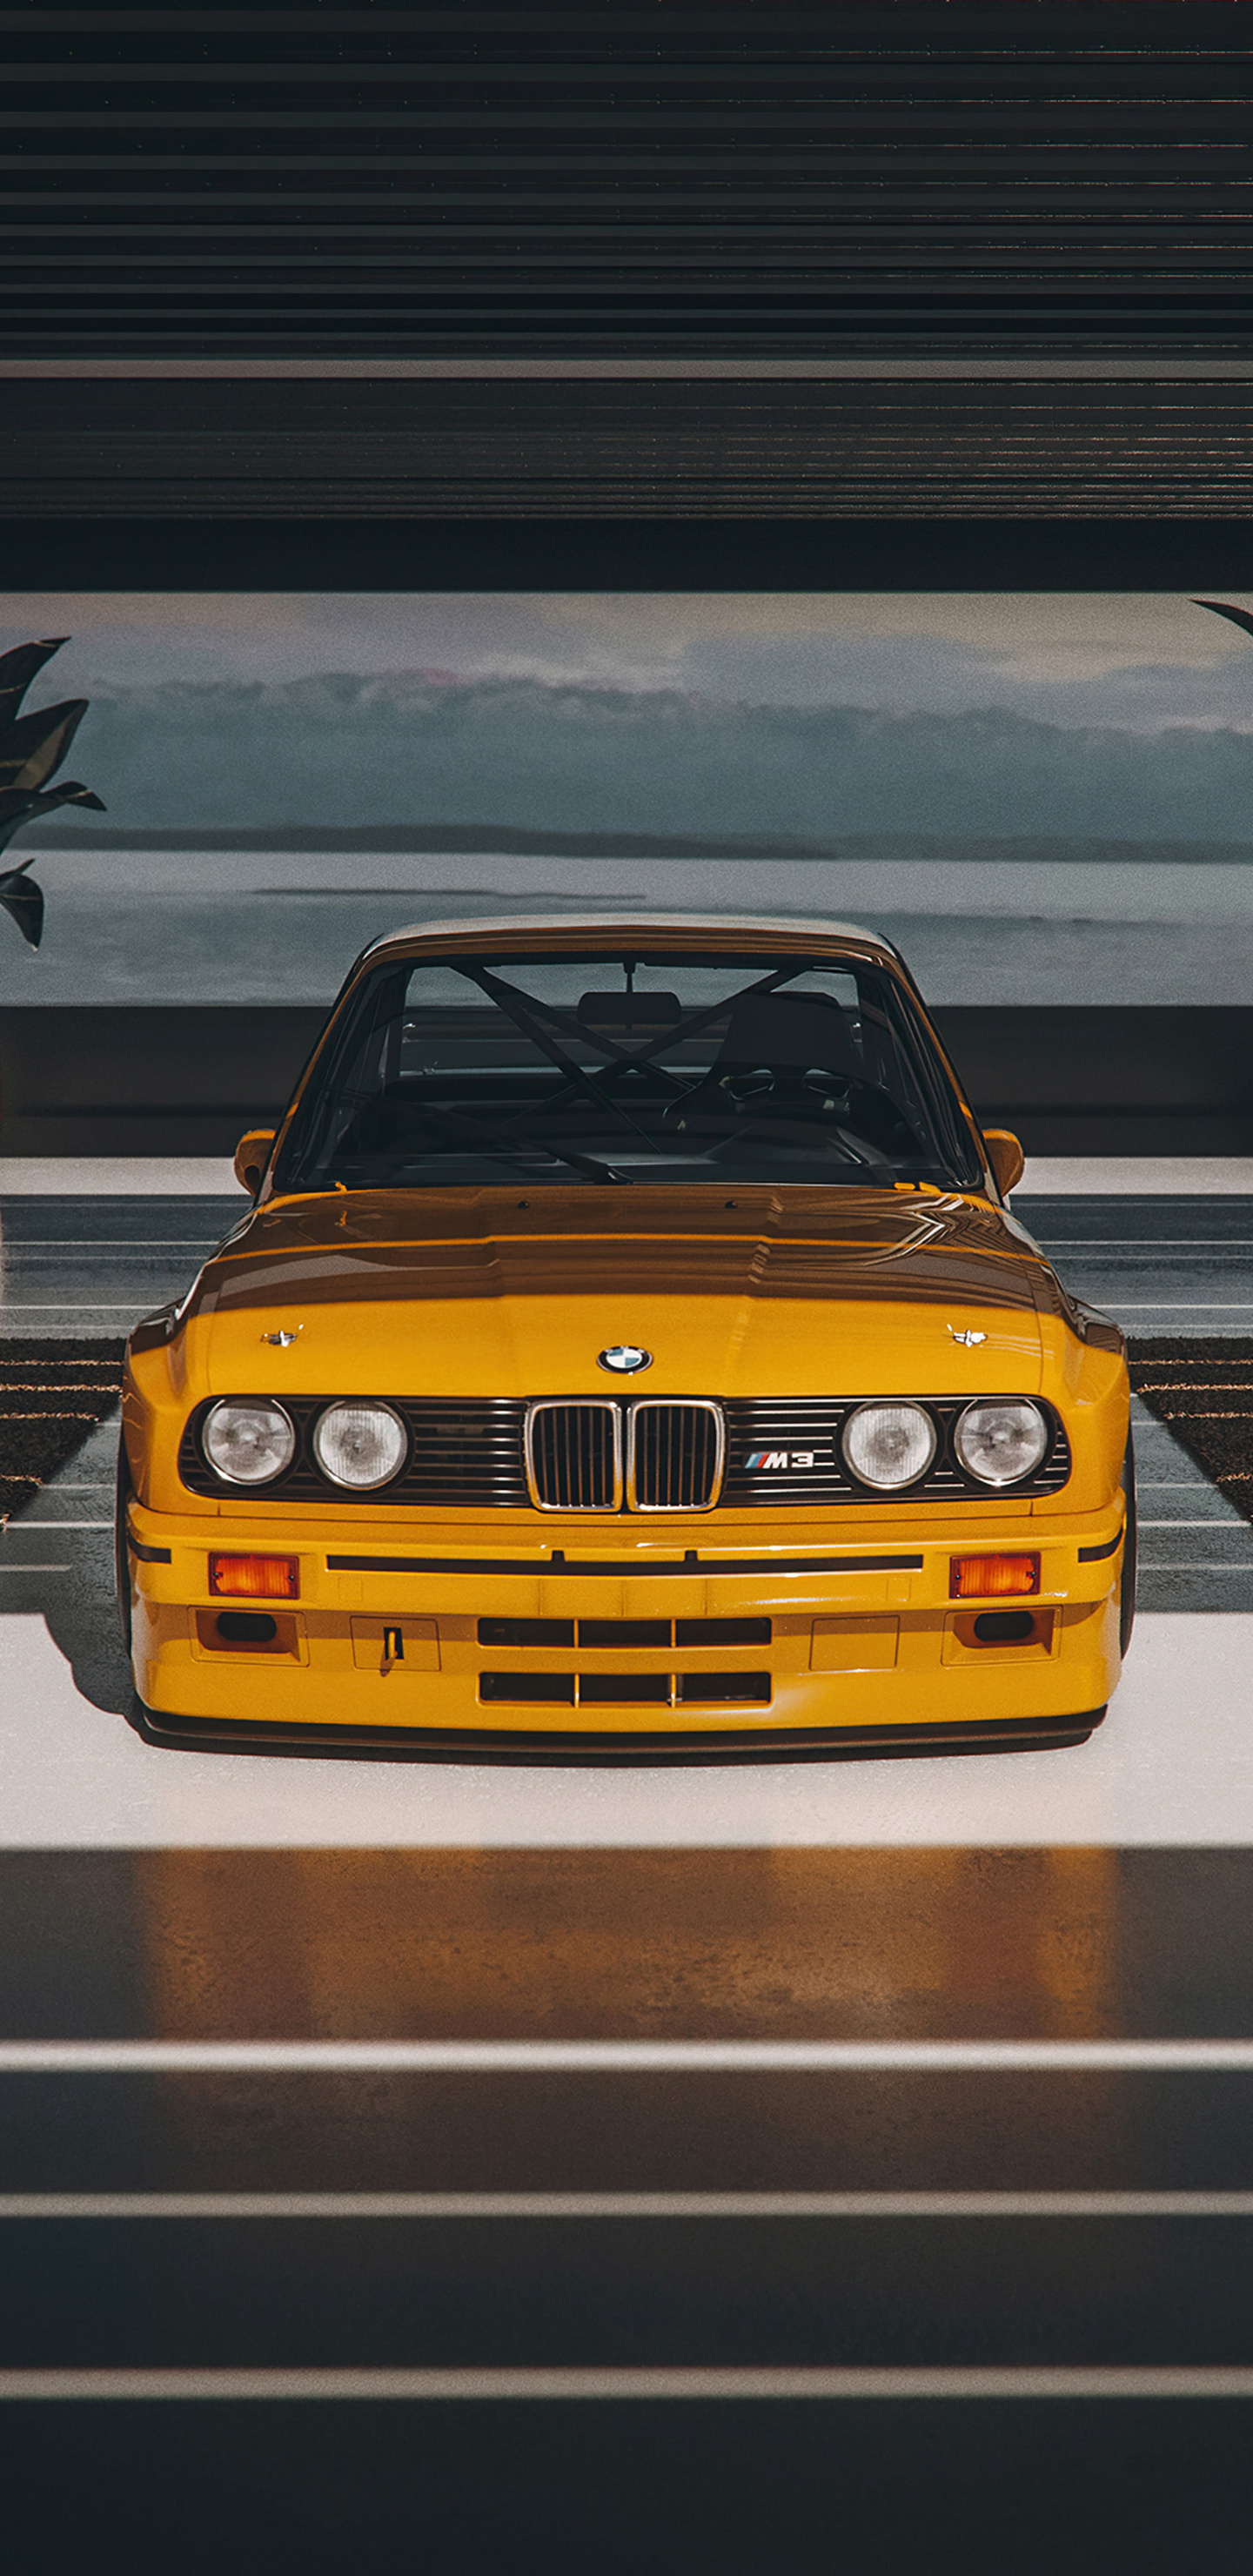 1440x2960 Bmw E30 M3 Evo Dtm 4k Samsung Galaxy Note 9,8, S9,S8,S8+ QHD HD  4k Wallpapers, Images, Backgrounds, Photos and Pictures